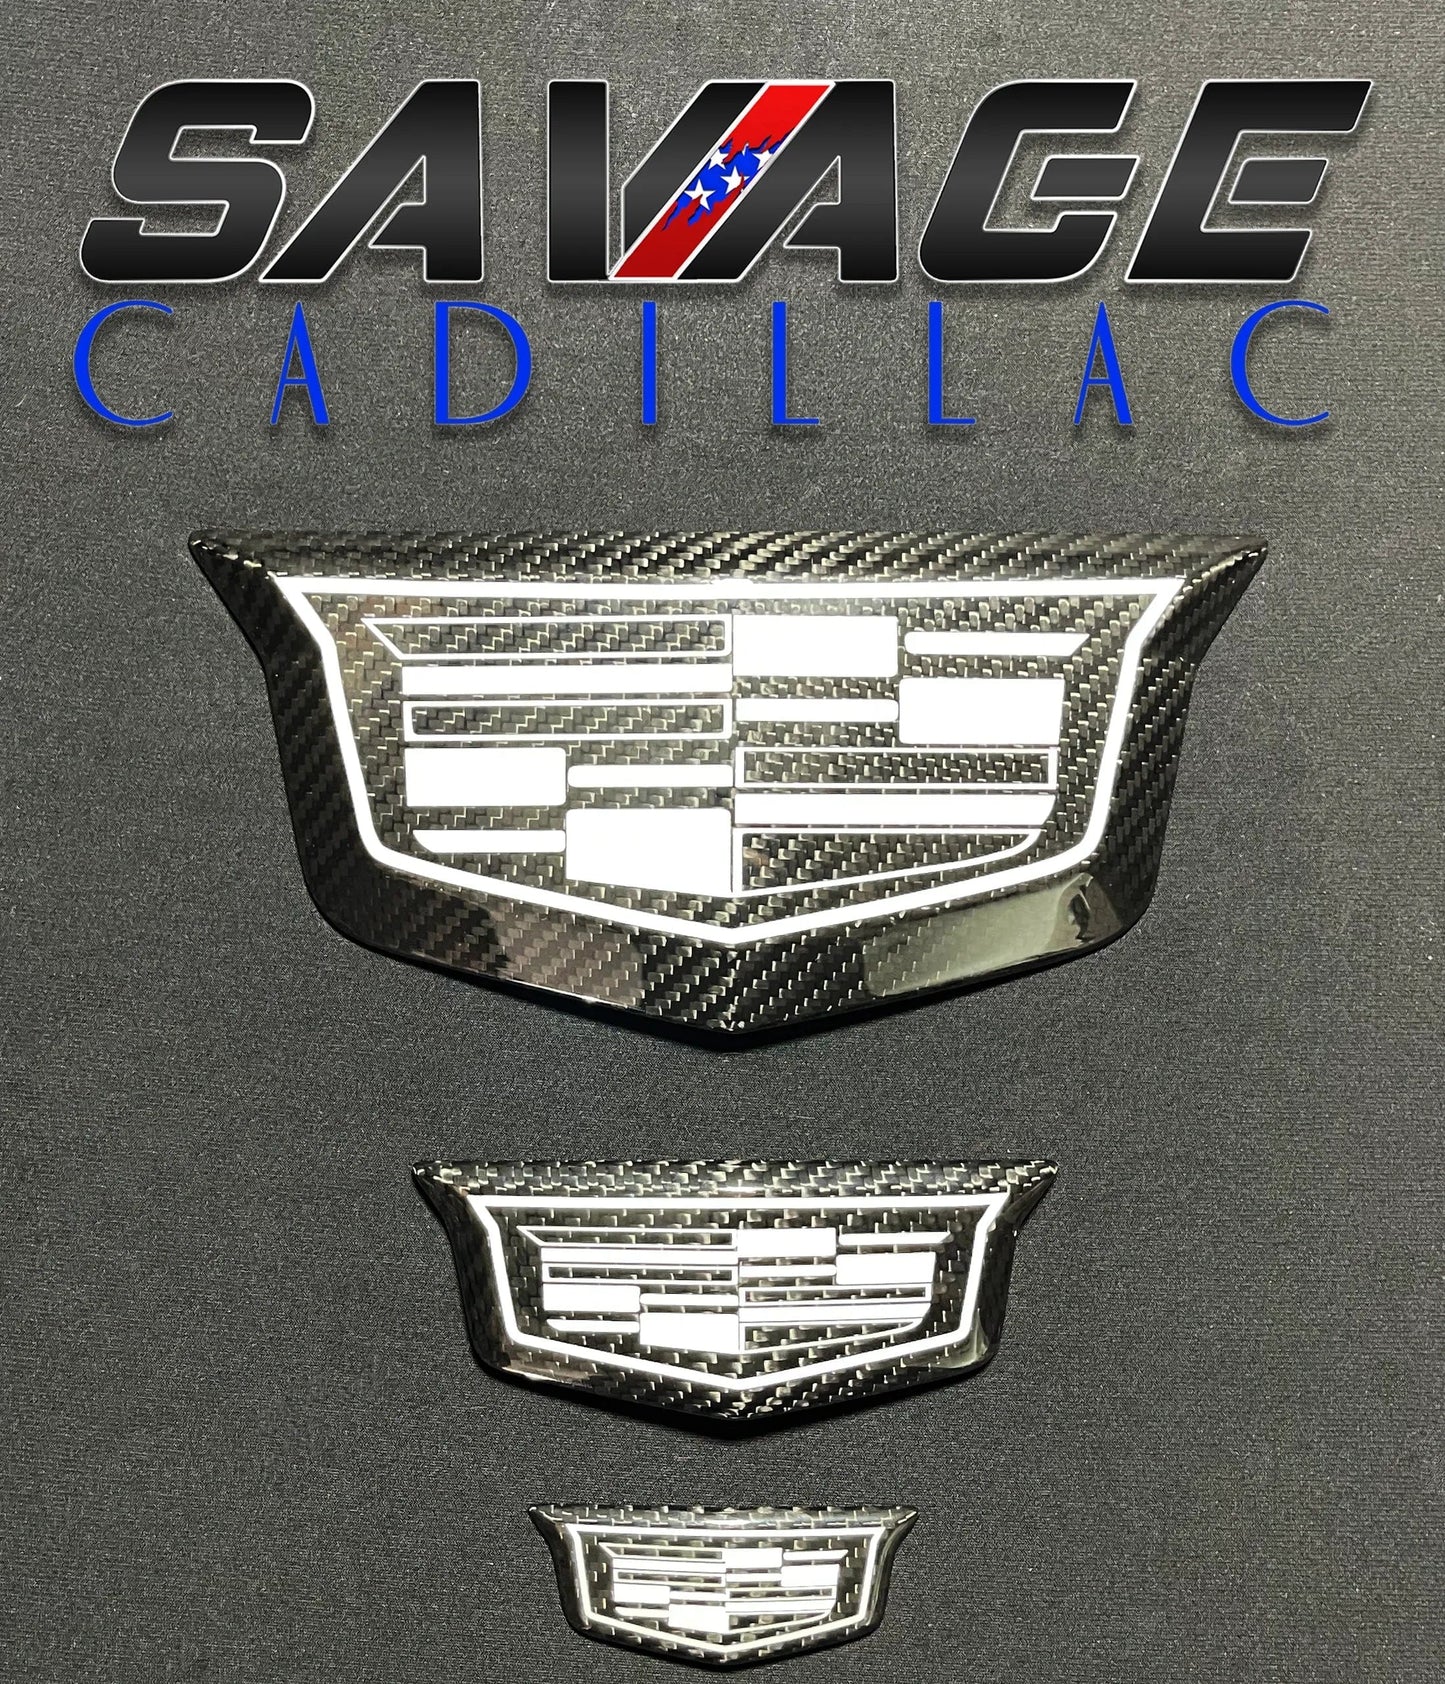 Cadillac CT5 Front Grille, Rear Trunk & Steering Wheel / Genuine Carbon Fiber Emblem Covers